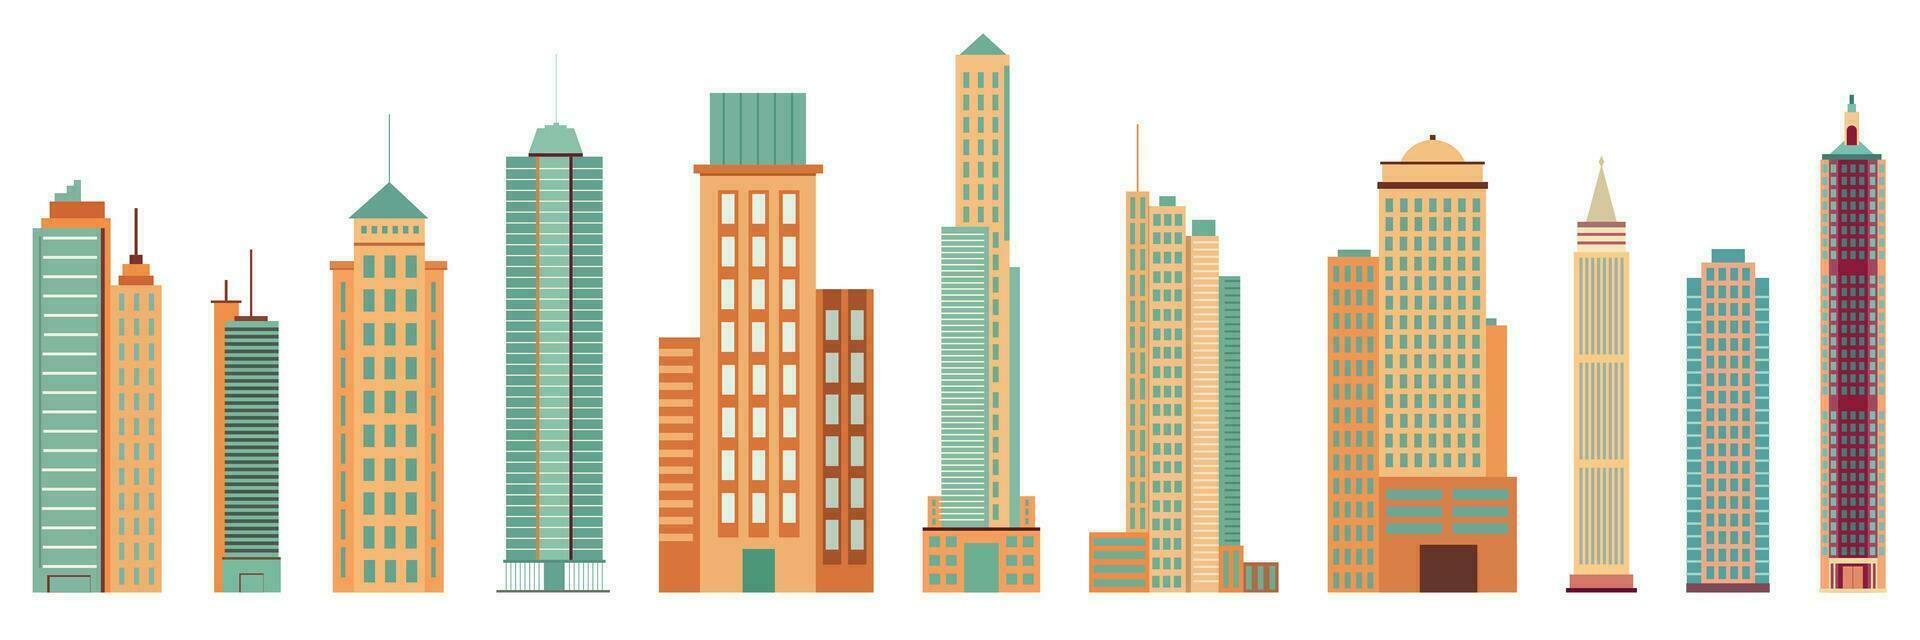 Collection of skyscrapers isolated on white background. Set of skyscrapers in flat style. Vector illustraiton.